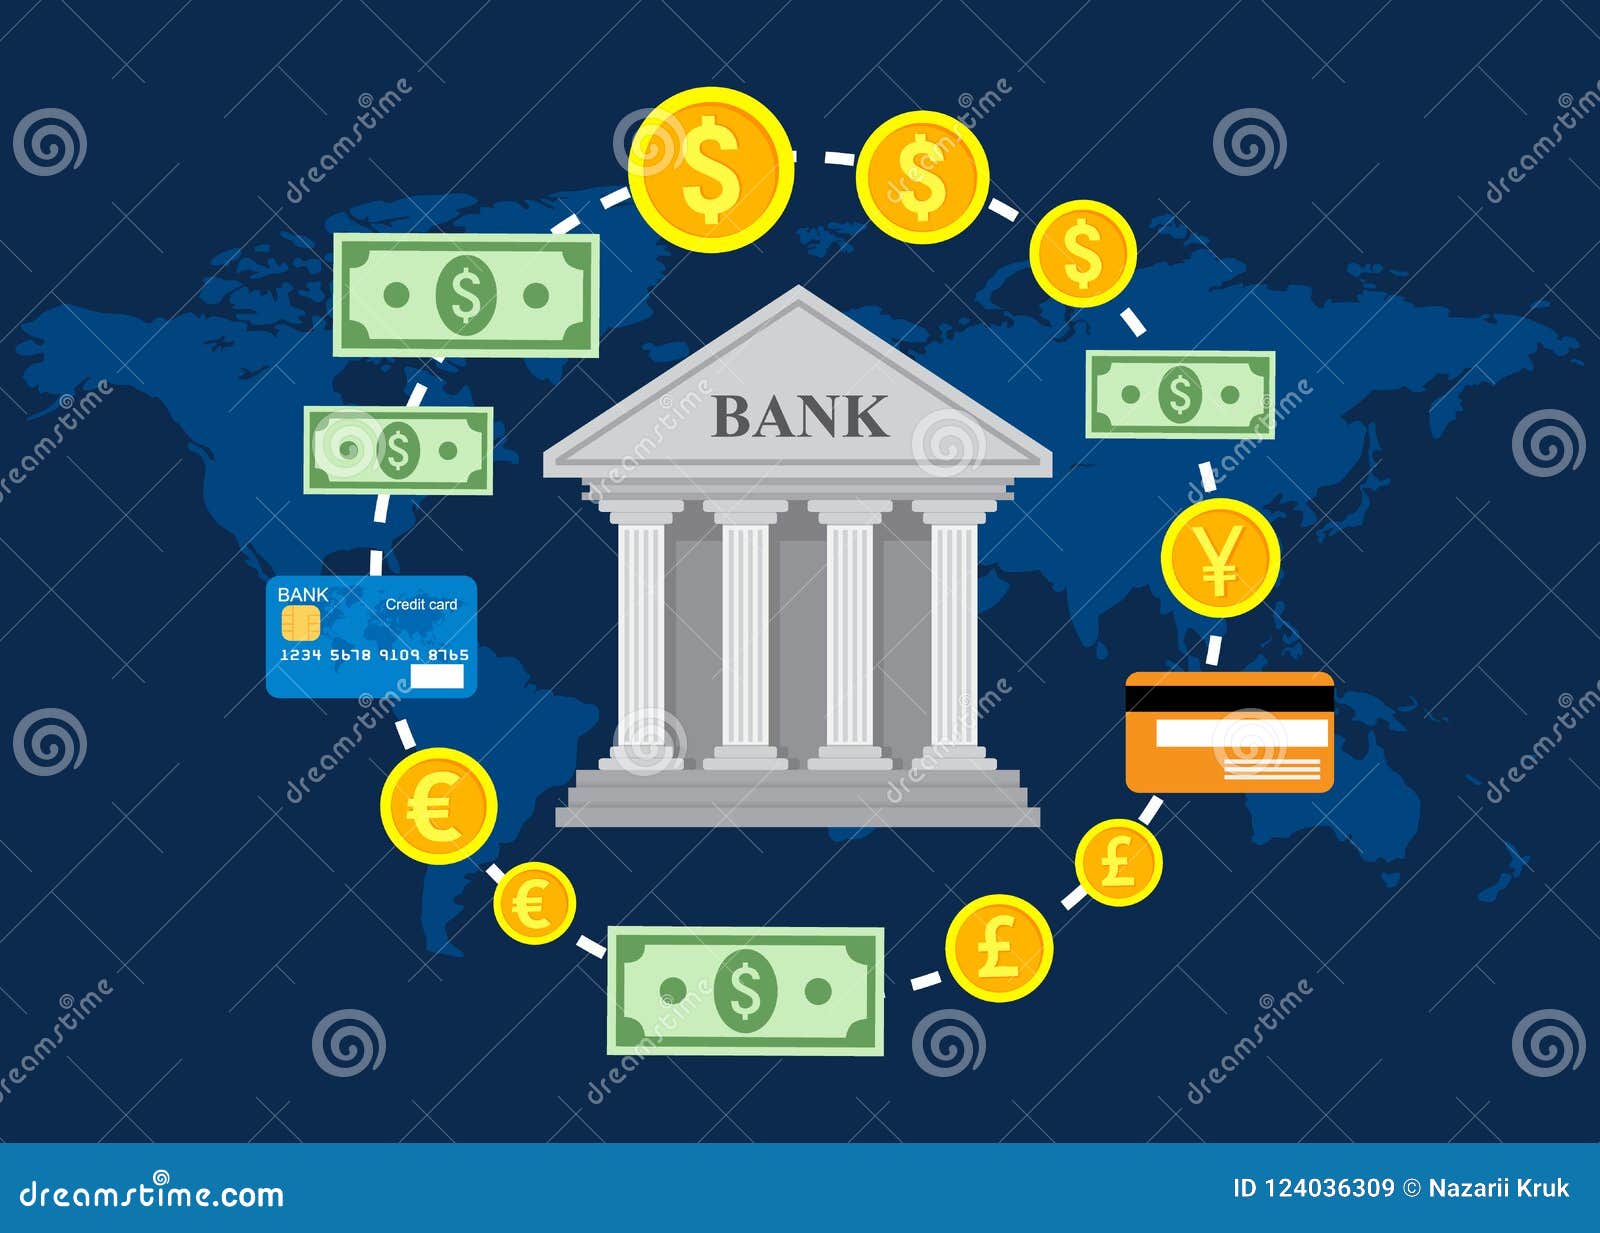 Get Complete Info About Immense Banking System Zero Plus Finance